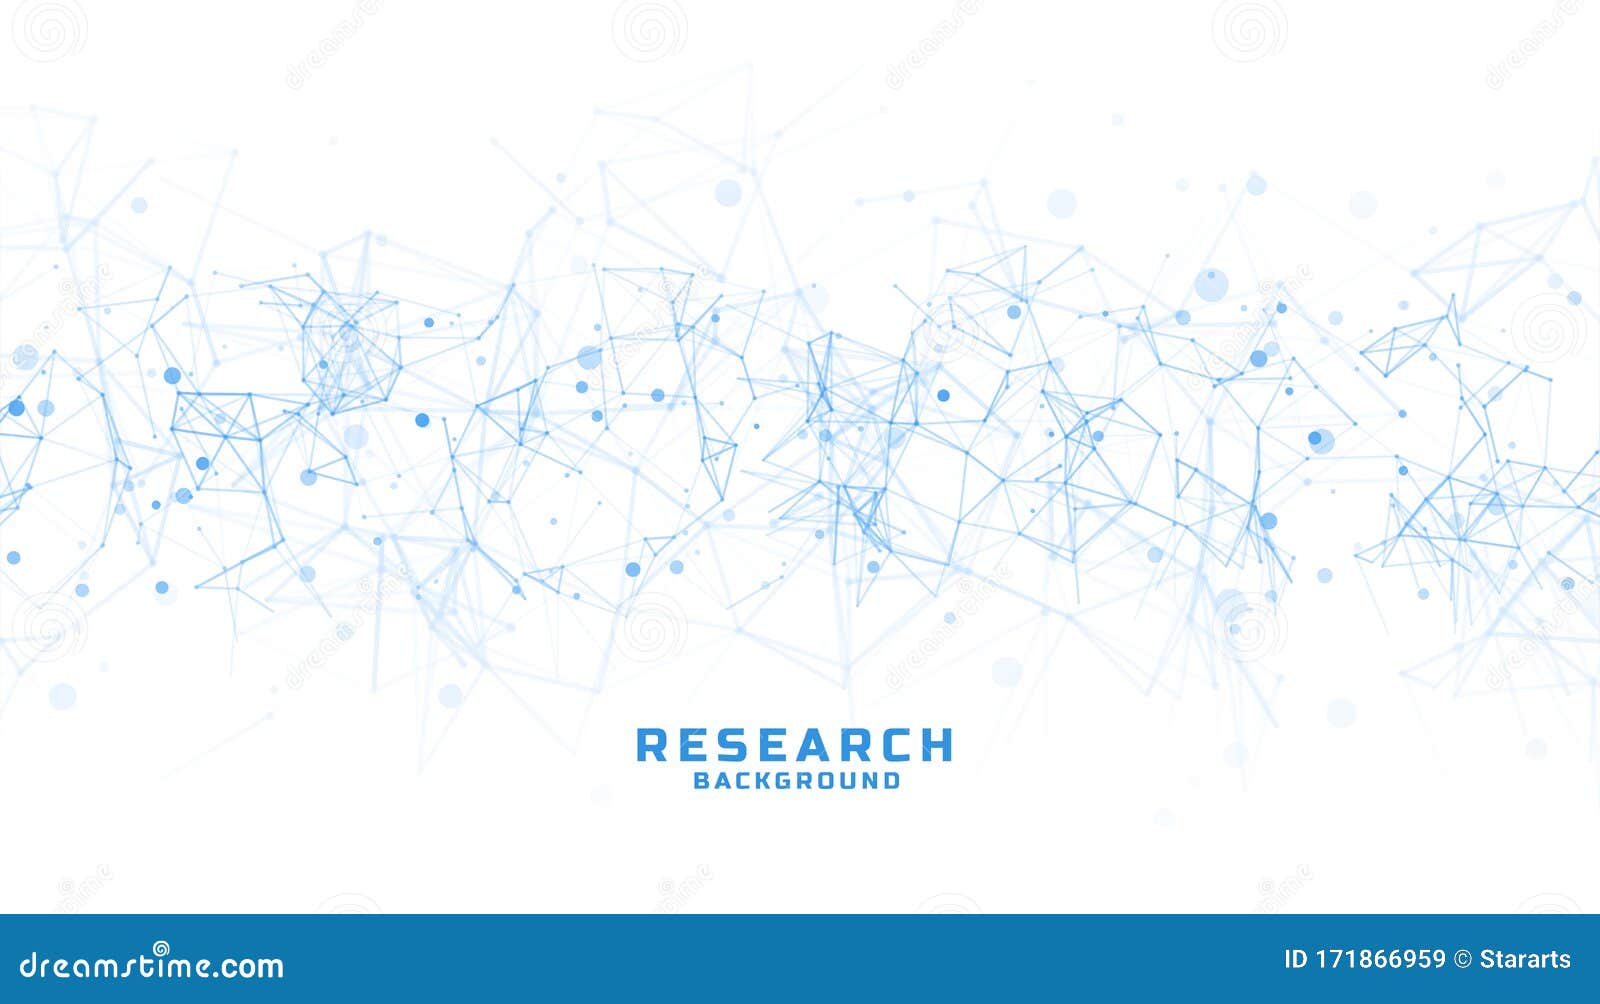 research abstract background